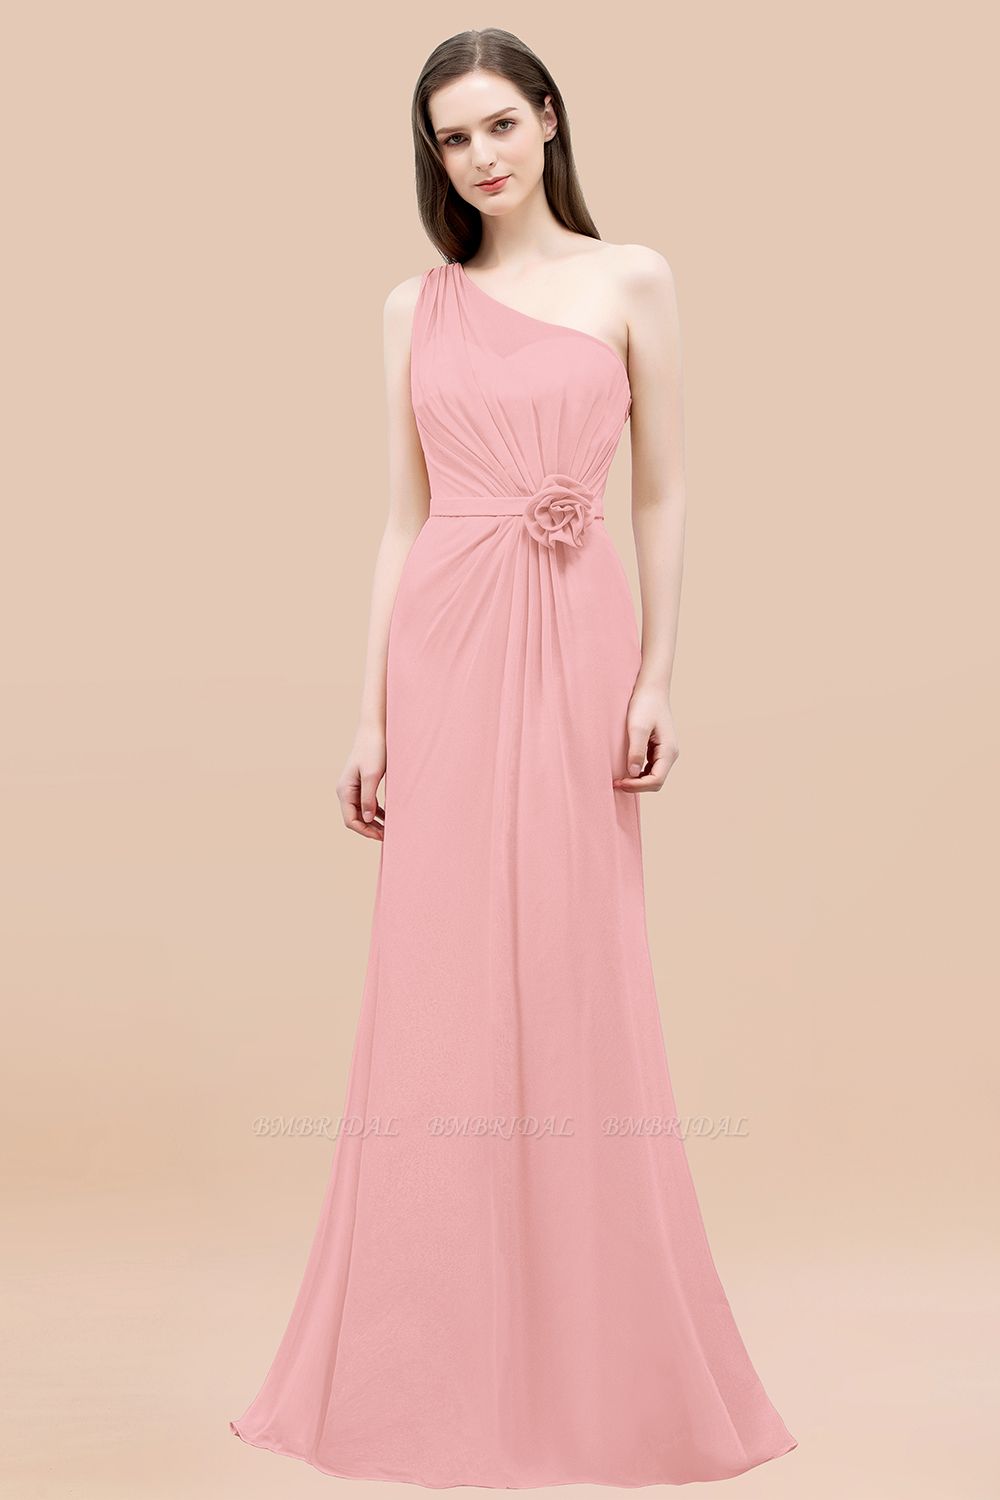 BMbridal Affordable Mermaid One shoulder Pink Bridesmaid Dresses with Flowers